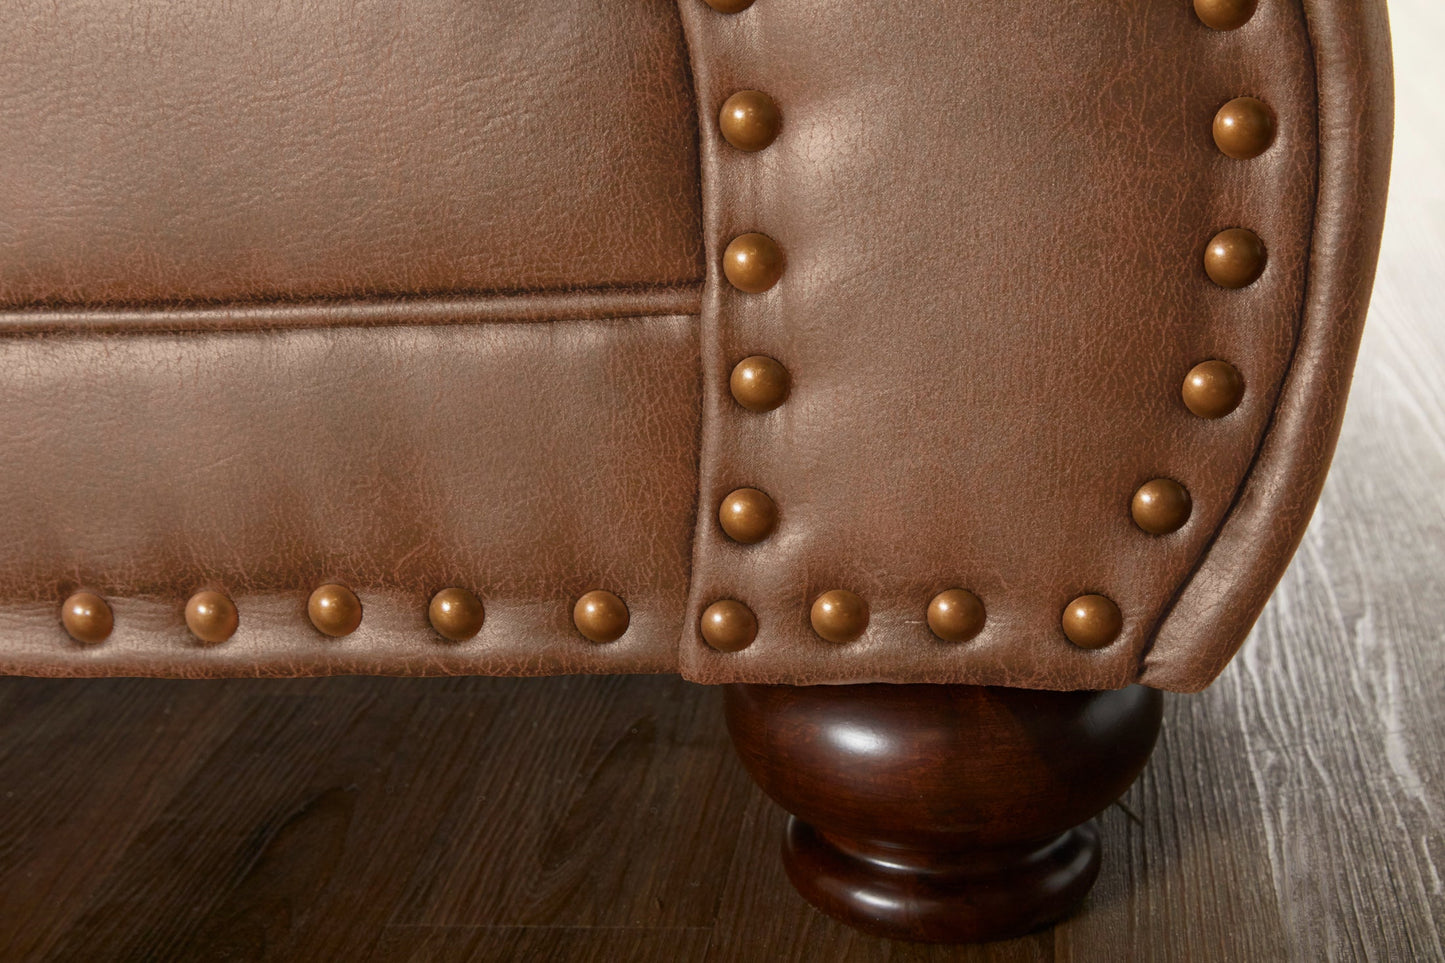 Leinster Faux Leather Loveseat with Antique Bronze Nailheads in Jetson Ginger